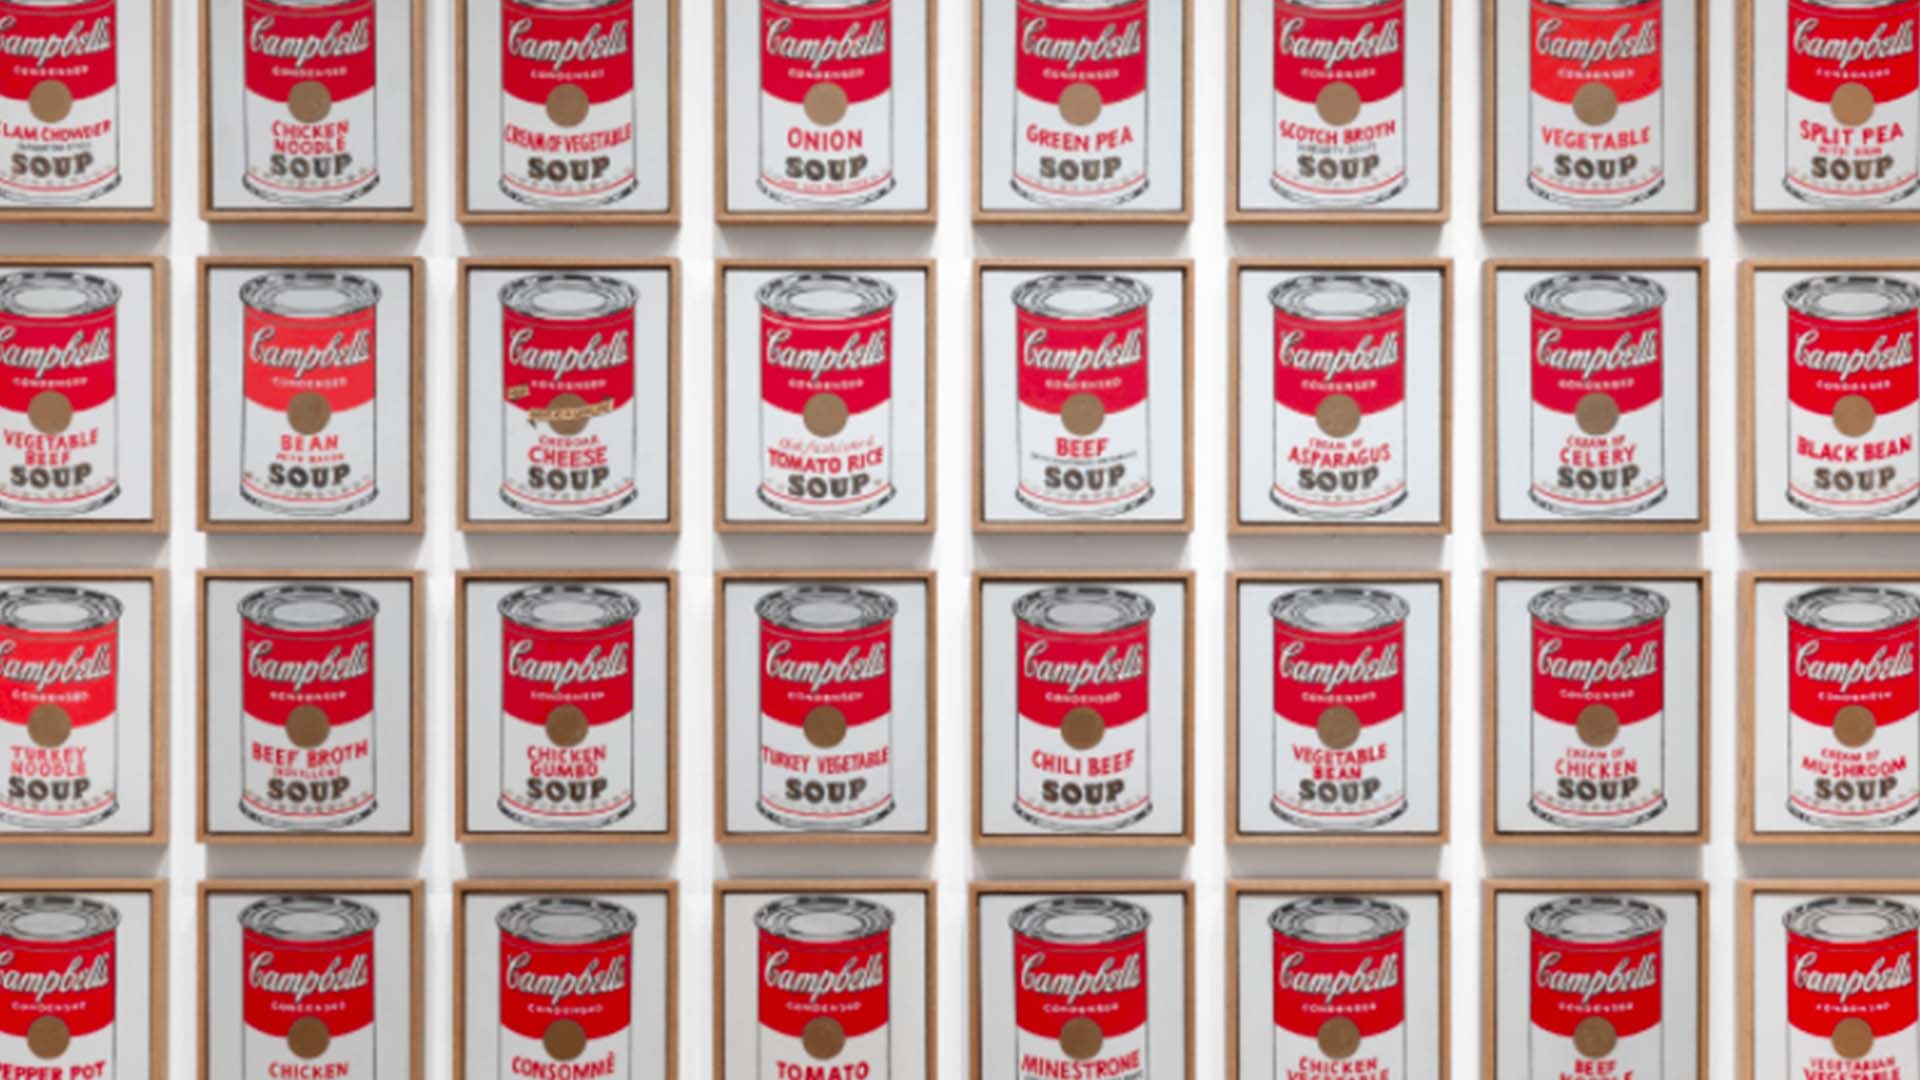 Campbell’s Soup Cans, Andy Warhol Pop Art